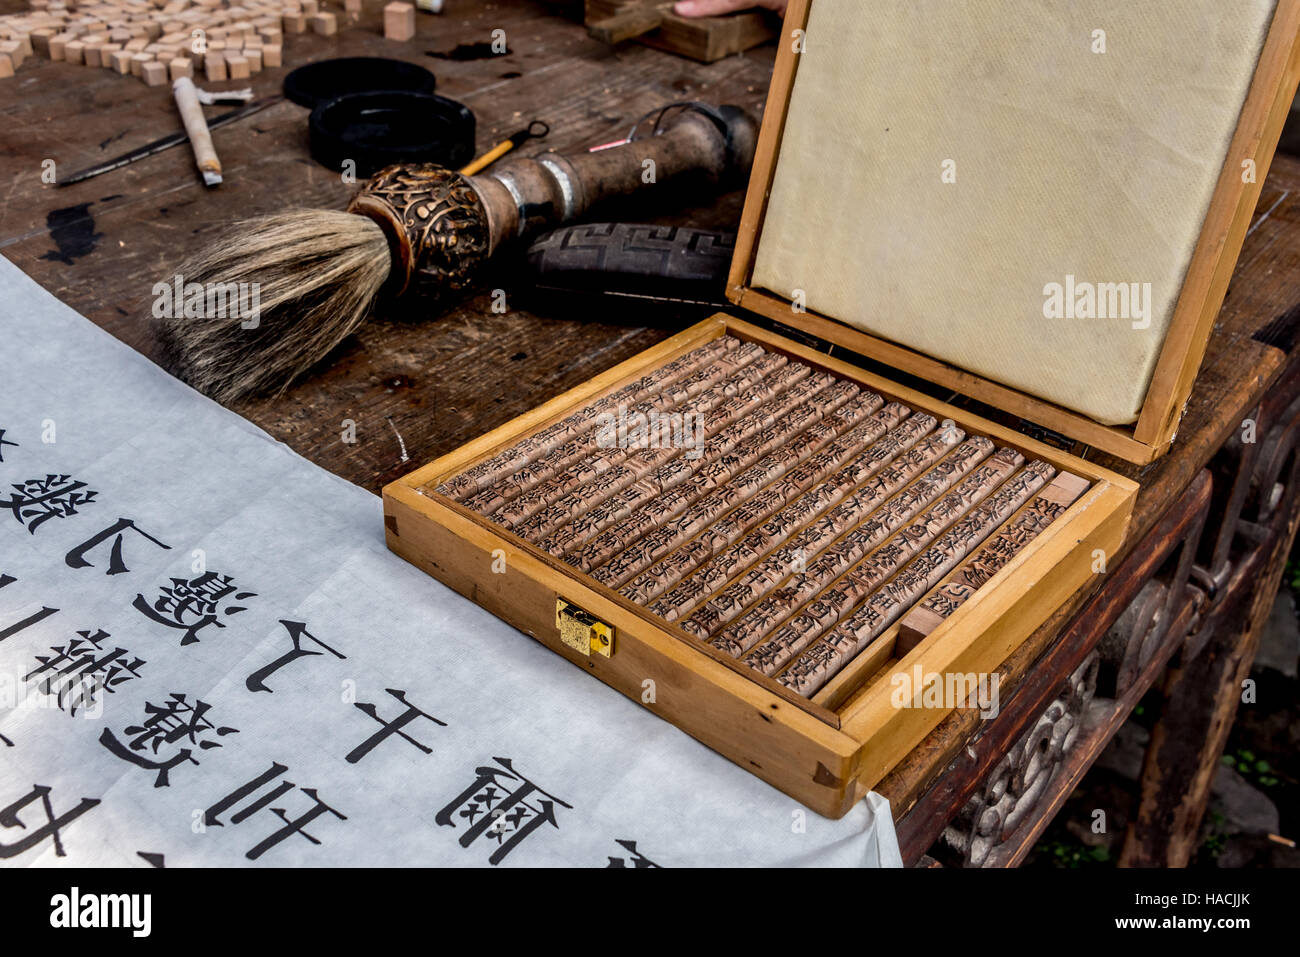 Box of hand-carved wooden movable type Chinese characters used to print a family genealogy at Dongyuan village, Ruian, China. Stock Photo